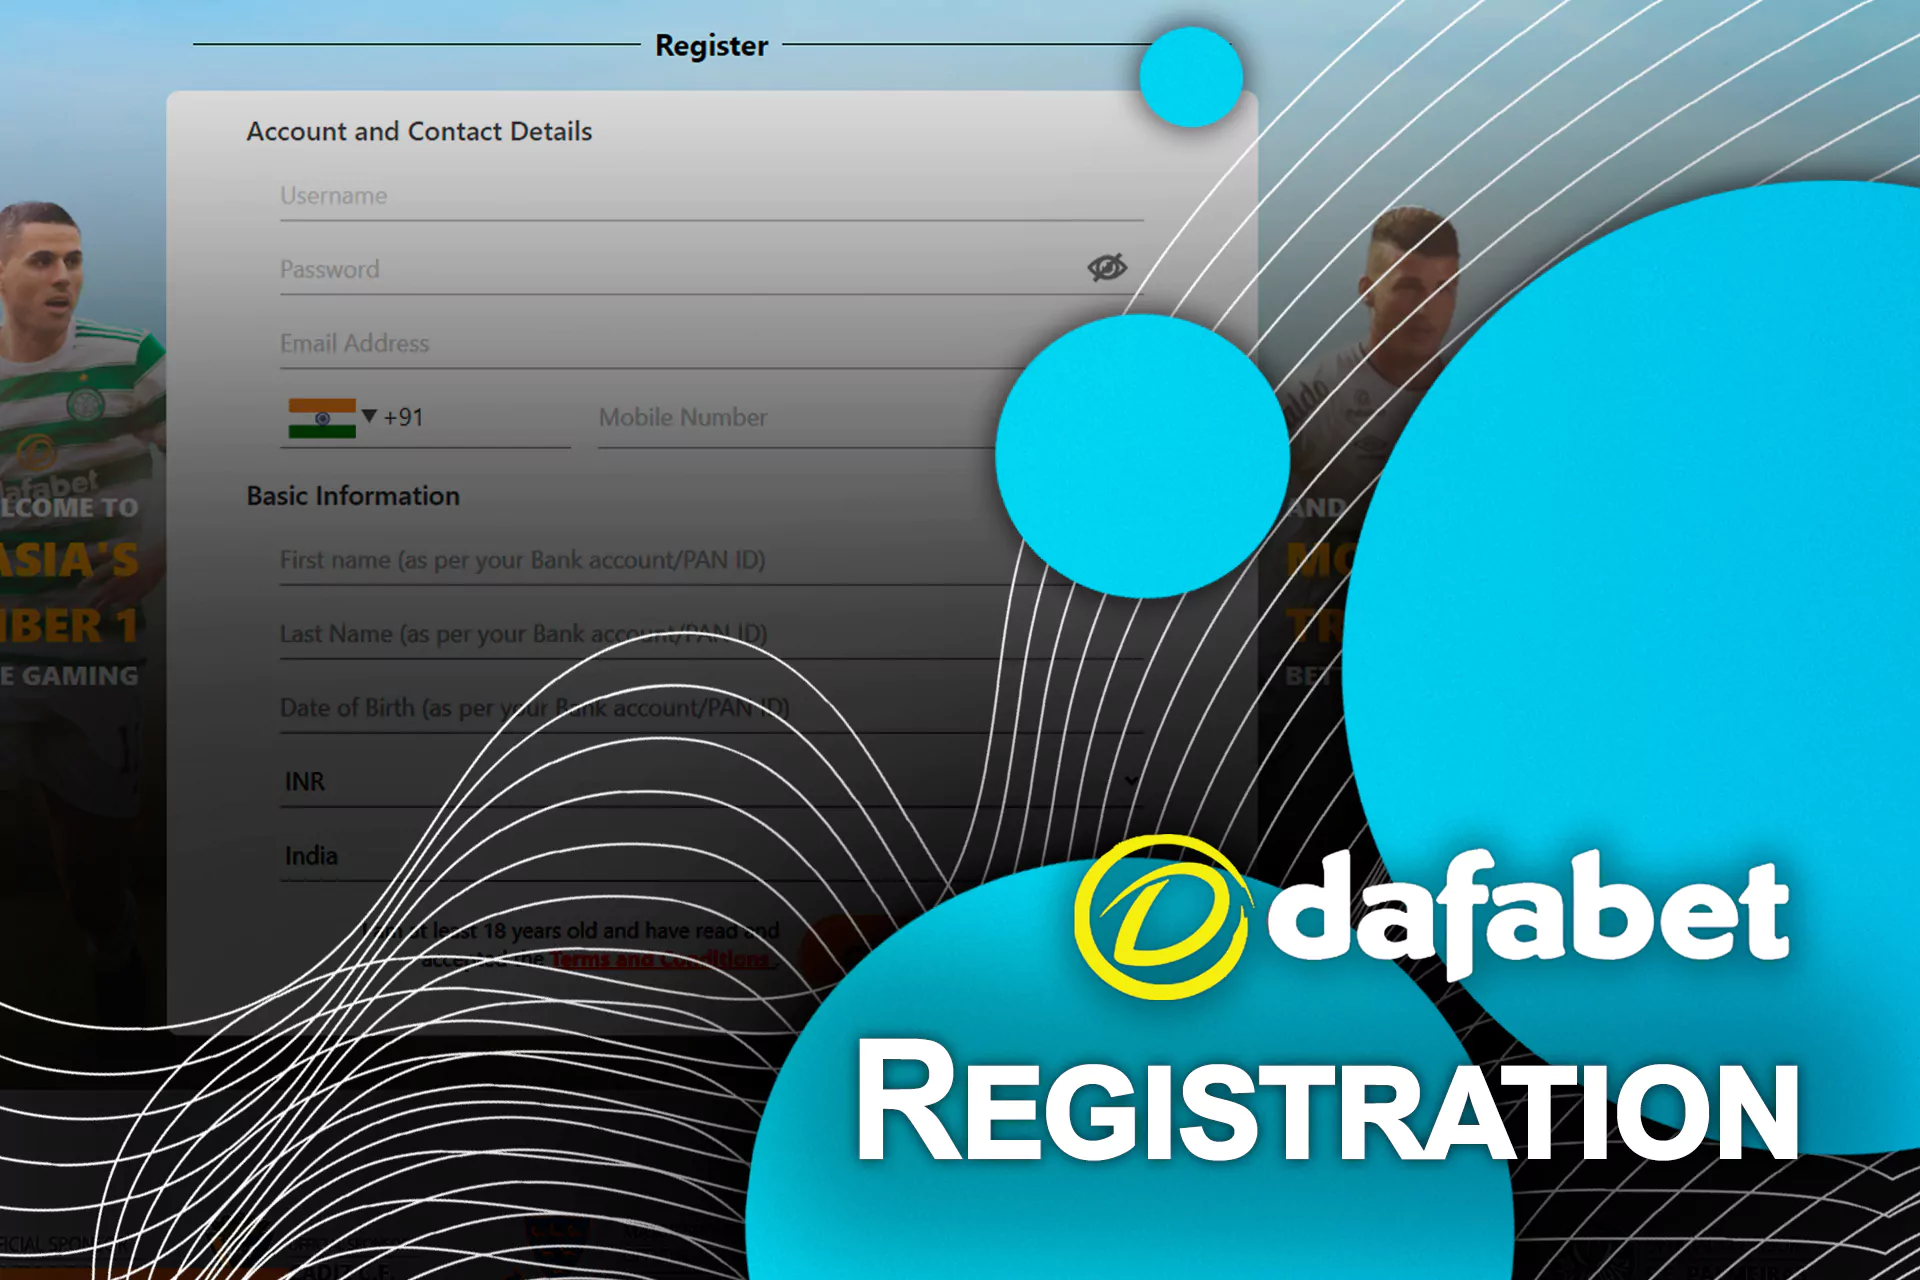 To start betting at Dafabet, firstly you need to create an account if you don't have one yet.